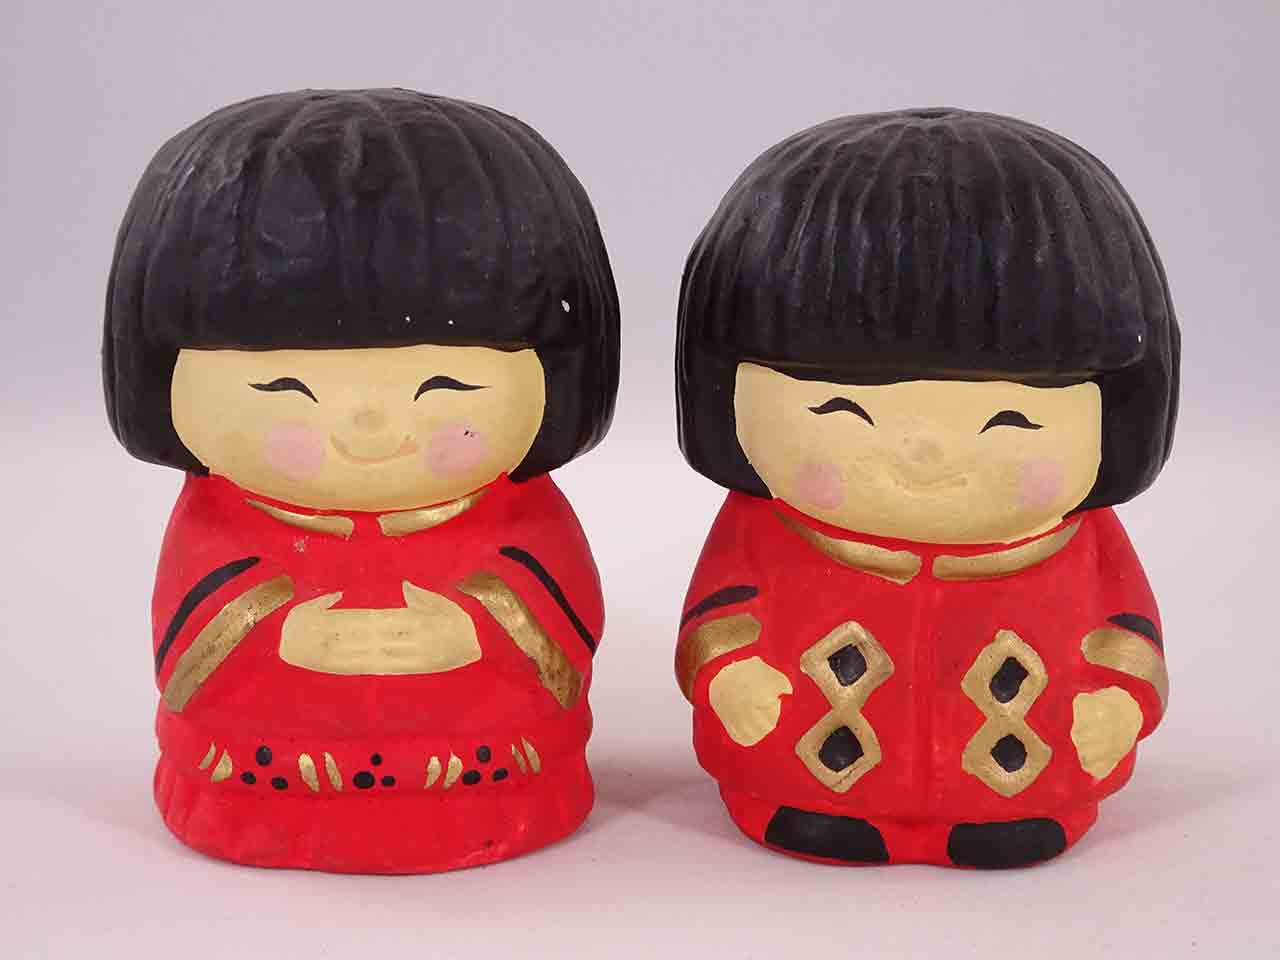 Gibson Greeting Cards Salt and Pepper Friends - Japanese salt and pepper shakers